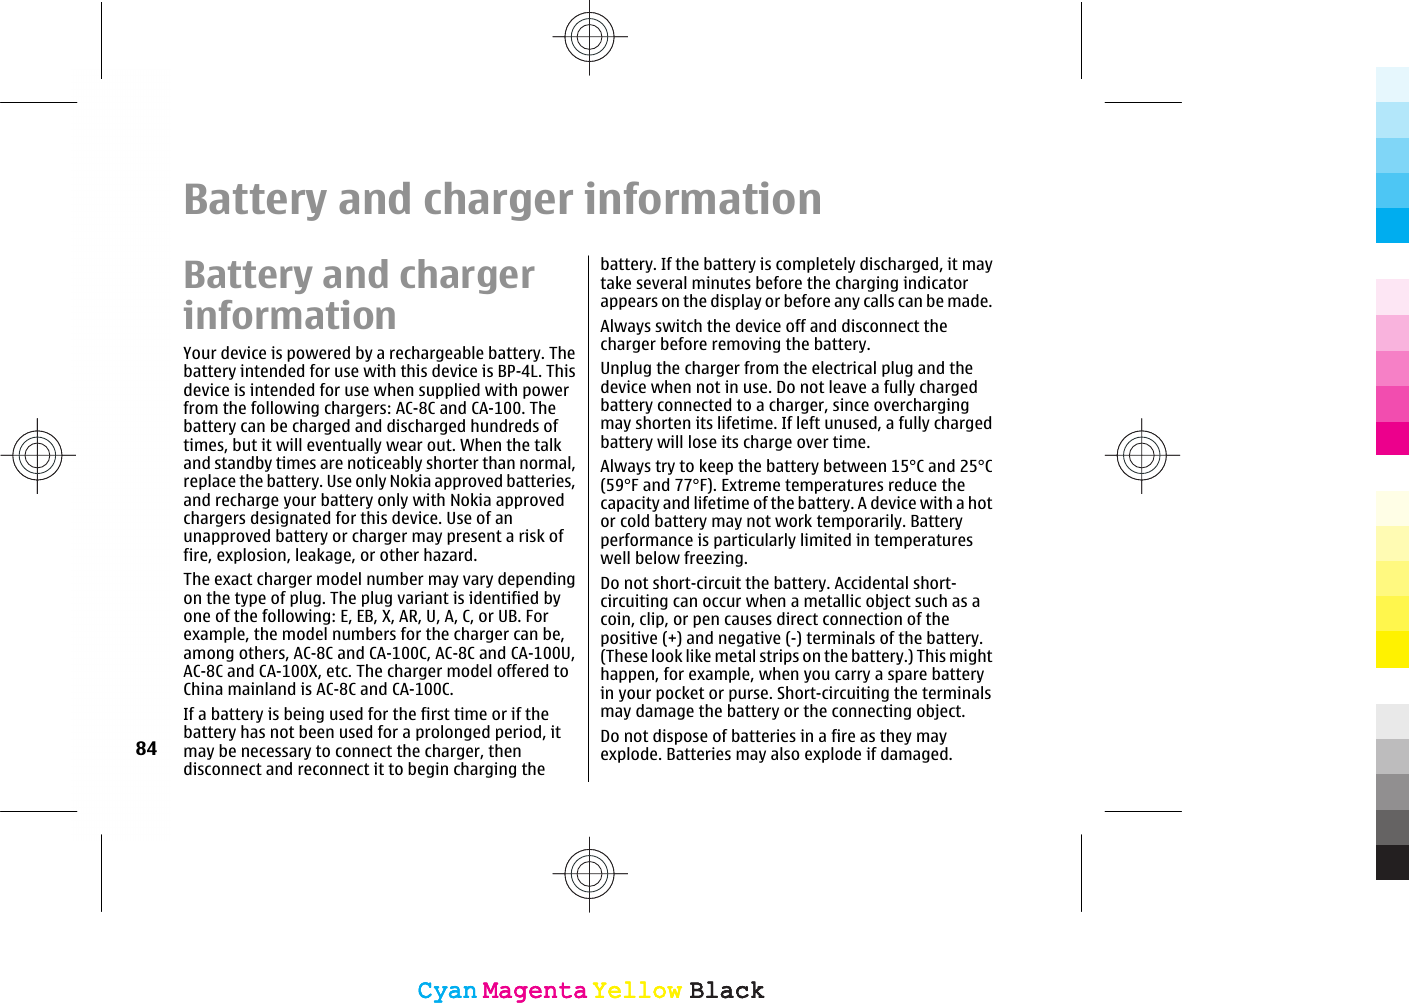 Battery and charger informationBattery and chargerinformationYour device is powered by a rechargeable battery. Thebattery intended for use with this device is BP-4L. Thisdevice is intended for use when supplied with powerfrom the following chargers: AC-8C and CA-100. Thebattery can be charged and discharged hundreds oftimes, but it will eventually wear out. When the talkand standby times are noticeably shorter than normal,replace the battery. Use only Nokia approved batteries,and recharge your battery only with Nokia approvedchargers designated for this device. Use of anunapproved battery or charger may present a risk offire, explosion, leakage, or other hazard.The exact charger model number may vary dependingon the type of plug. The plug variant is identified byone of the following: E, EB, X, AR, U, A, C, or UB. Forexample, the model numbers for the charger can be,among others, AC-8C and CA-100C, AC-8C and CA-100U,AC-8C and CA-100X, etc. The charger model offered toChina mainland is AC-8C and CA-100C.If a battery is being used for the first time or if thebattery has not been used for a prolonged period, itmay be necessary to connect the charger, thendisconnect and reconnect it to begin charging thebattery. If the battery is completely discharged, it maytake several minutes before the charging indicatorappears on the display or before any calls can be made.Always switch the device off and disconnect thecharger before removing the battery.Unplug the charger from the electrical plug and thedevice when not in use. Do not leave a fully chargedbattery connected to a charger, since overchargingmay shorten its lifetime. If left unused, a fully chargedbattery will lose its charge over time.Always try to keep the battery between 15°C and 25°C(59°F and 77°F). Extreme temperatures reduce thecapacity and lifetime of the battery. A device with a hotor cold battery may not work temporarily. Batteryperformance is particularly limited in temperatureswell below freezing.Do not short-circuit the battery. Accidental short-circuiting can occur when a metallic object such as acoin, clip, or pen causes direct connection of thepositive (+) and negative (-) terminals of the battery.(These look like metal strips on the battery.) This mighthappen, for example, when you carry a spare batteryin your pocket or purse. Short-circuiting the terminalsmay damage the battery or the connecting object.Do not dispose of batteries in a fire as they mayexplode. Batteries may also explode if damaged.84CyanCyanMagentaMagentaYellowYellowBlackBlackCyanCyanMagentaMagentaYellowYellowBlackBlack